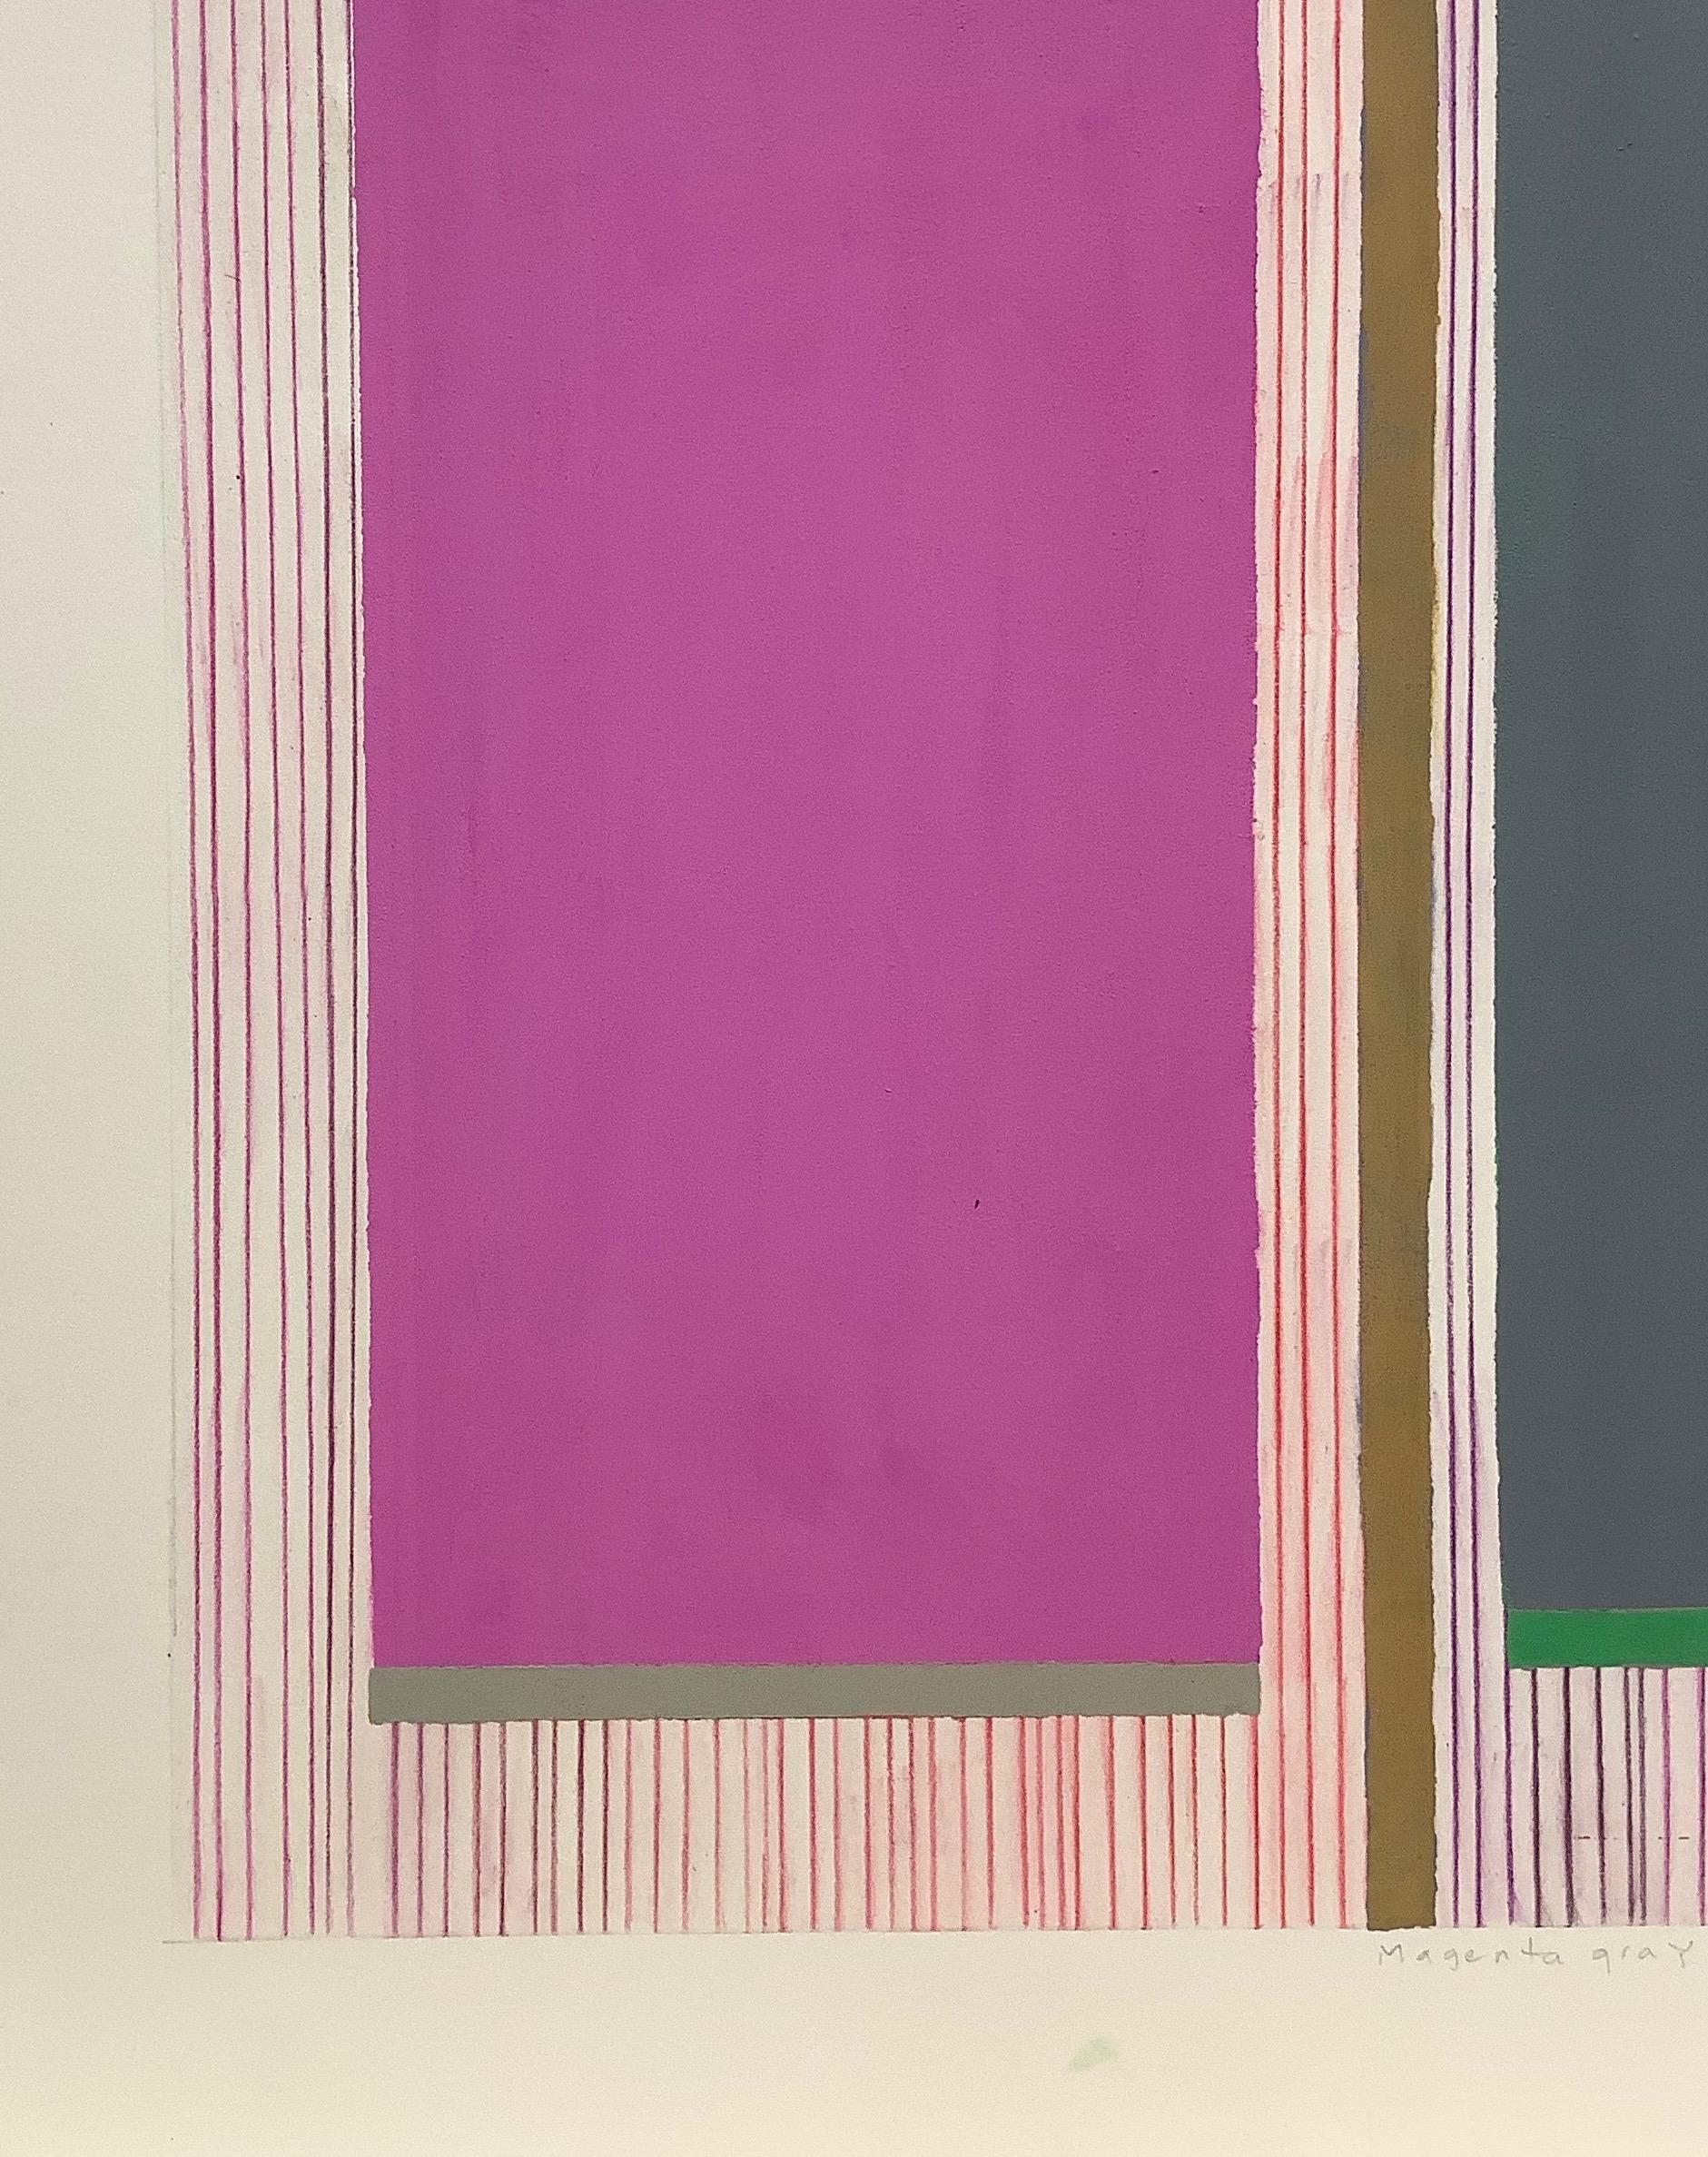 In this abstract painting in colored pencil and gouache on paper by Elizabeth Gourlay, clean and precise, carefully ordered blocks of color in pink and gray are rich against the pale beige color of the paper. A golden brown stripe in the center